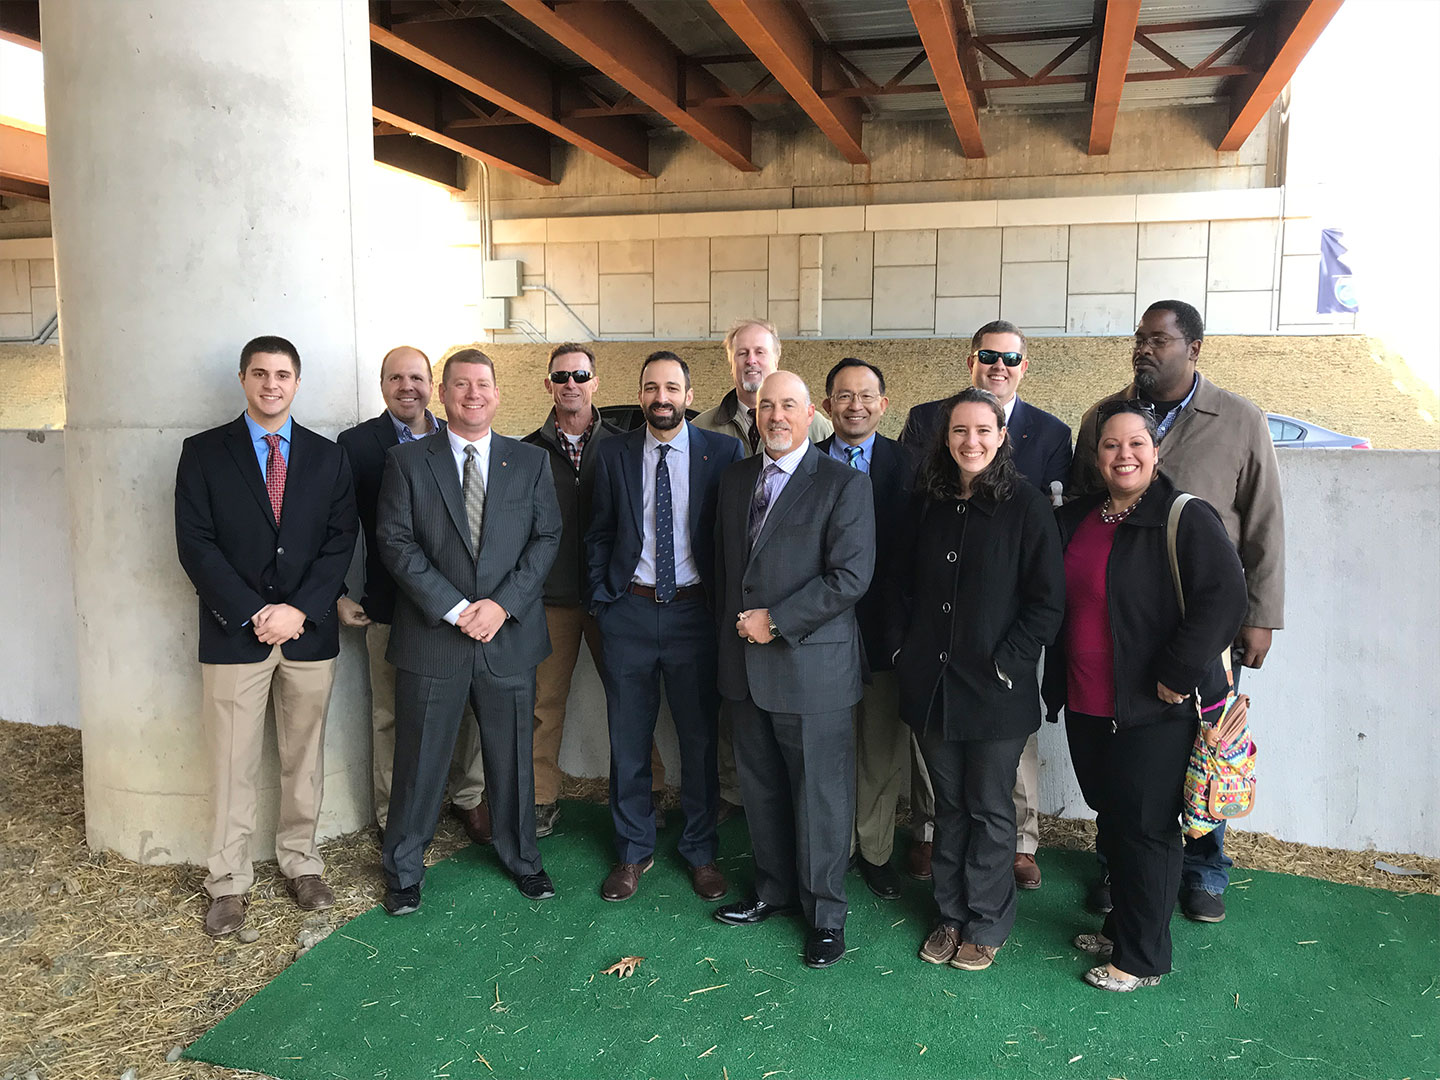 Members of the Dewberry design team and other consultants attended the ribbon-cutting ceremony for the opening of the new I-64 Segment I.